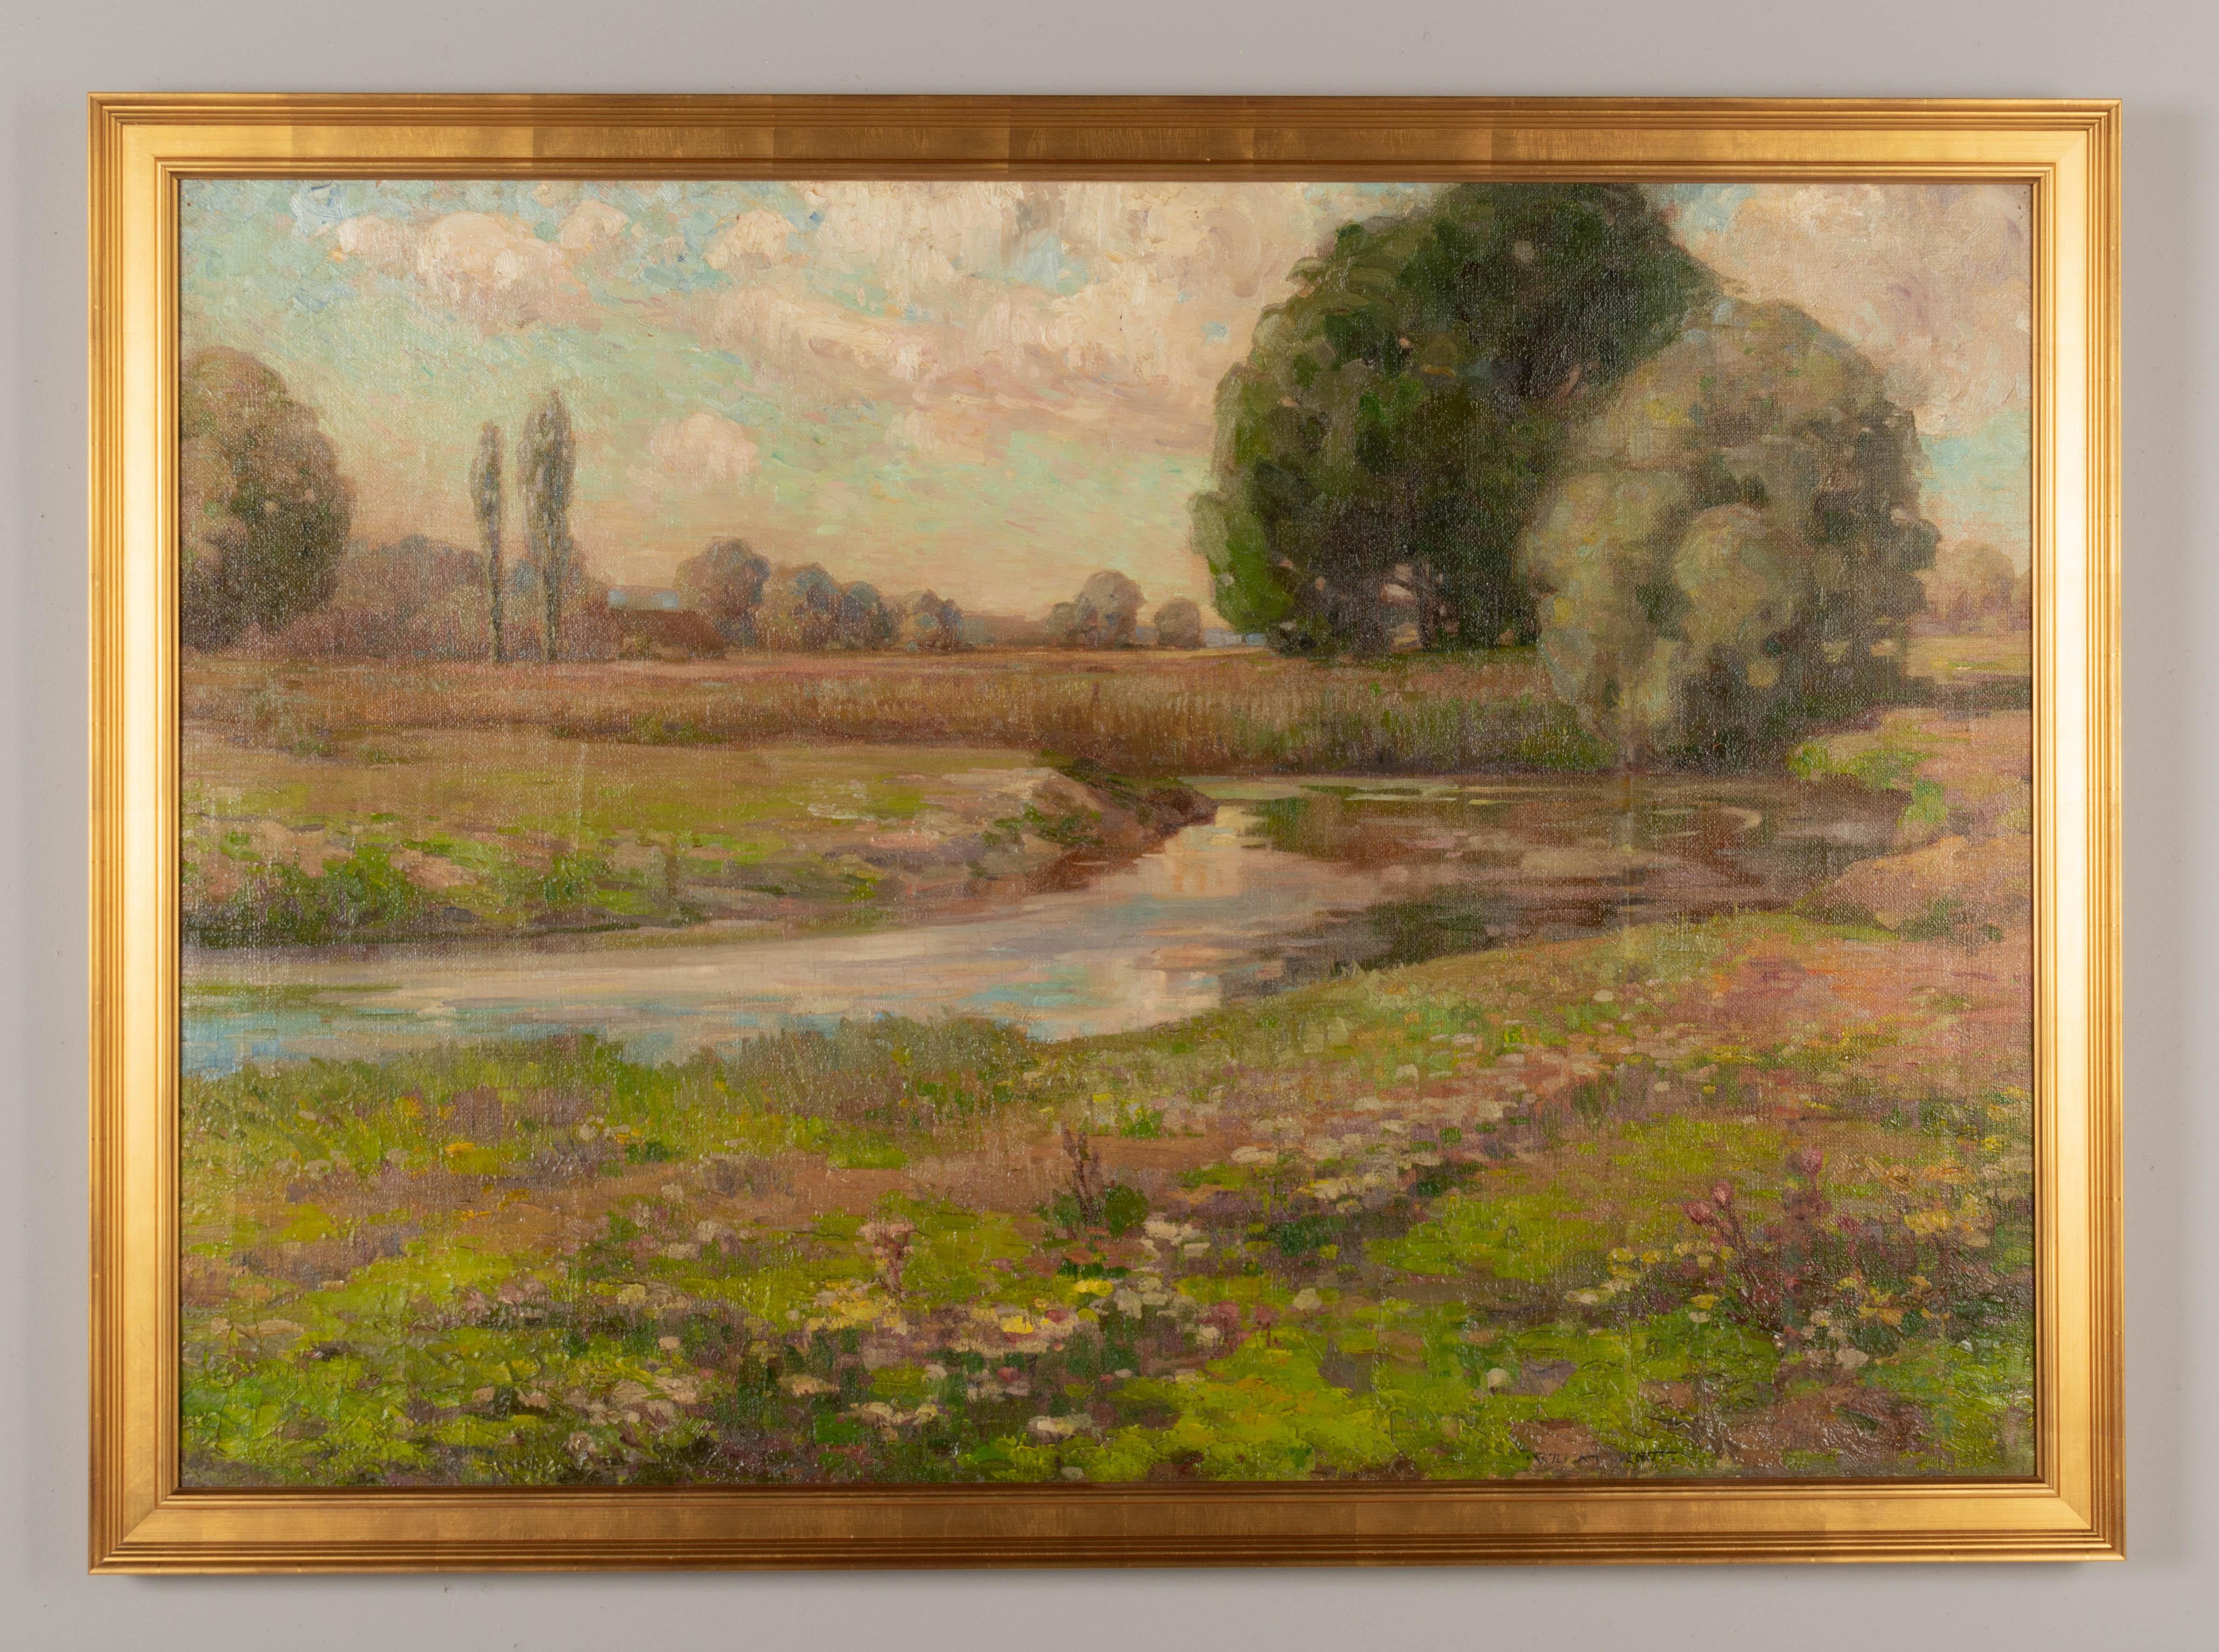 A California School Impressionist style landscape painting. Nice pastel colors: green, pale blue and pink. Oil on canvas, relined. Craquelure, minor paint loss and restoration. Signed lower right: William Wendt, but signature not authenticated. A